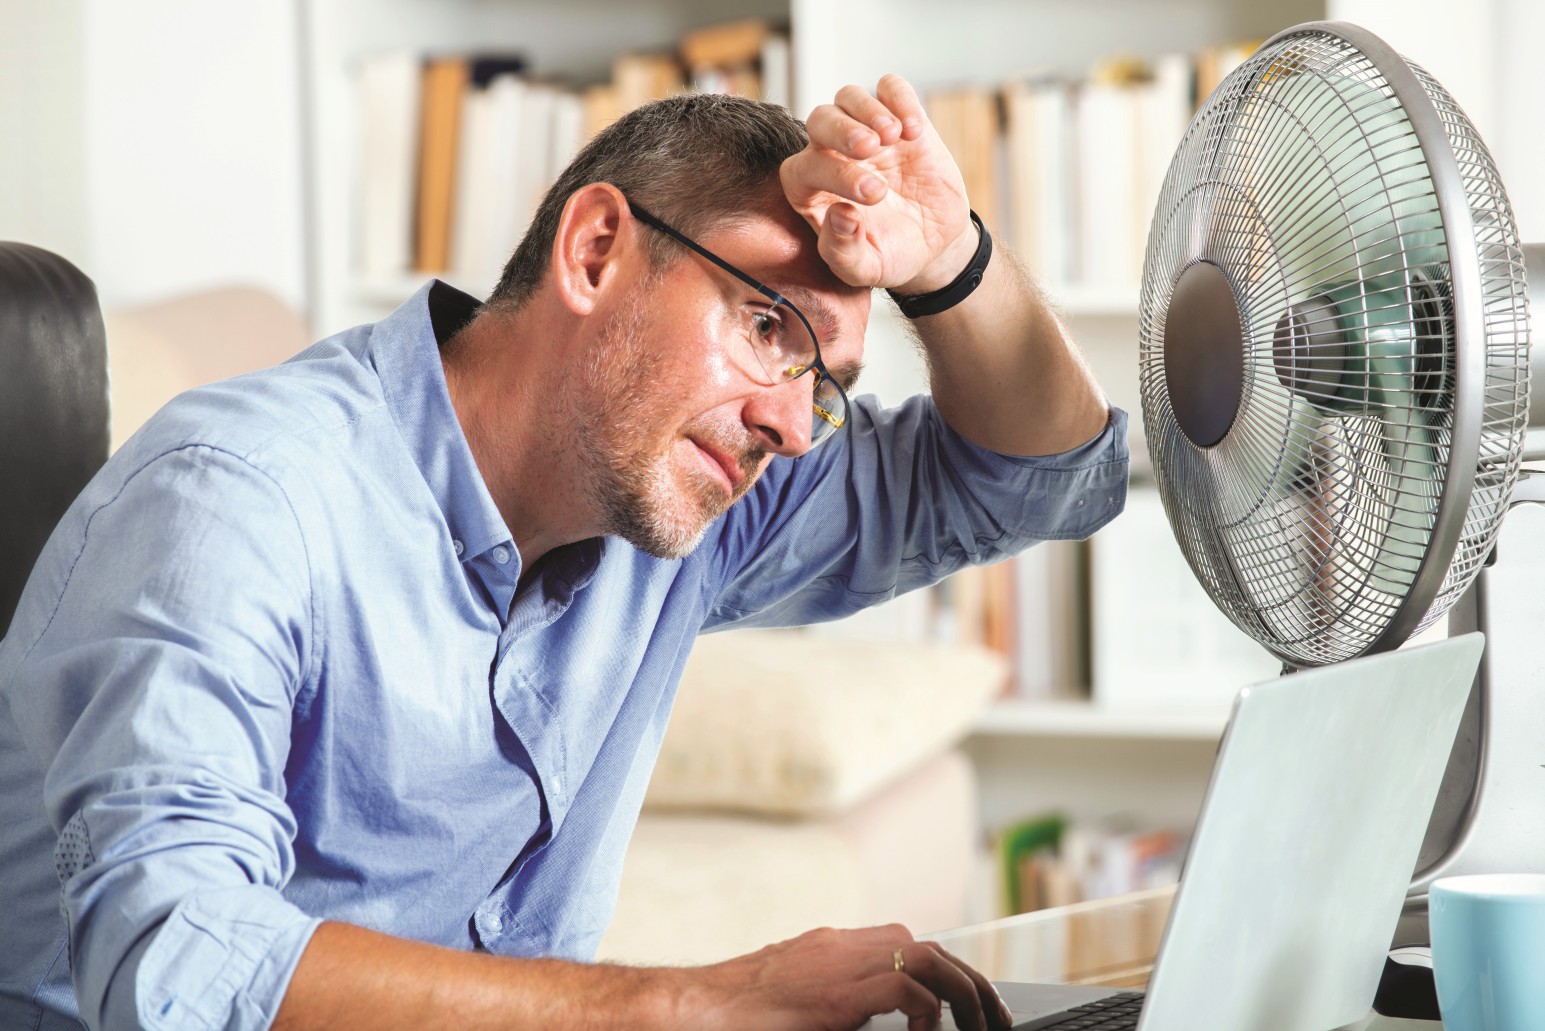 The picture shows a man sitting in front of a fan in an office, holding the back of his hand to his forehead.